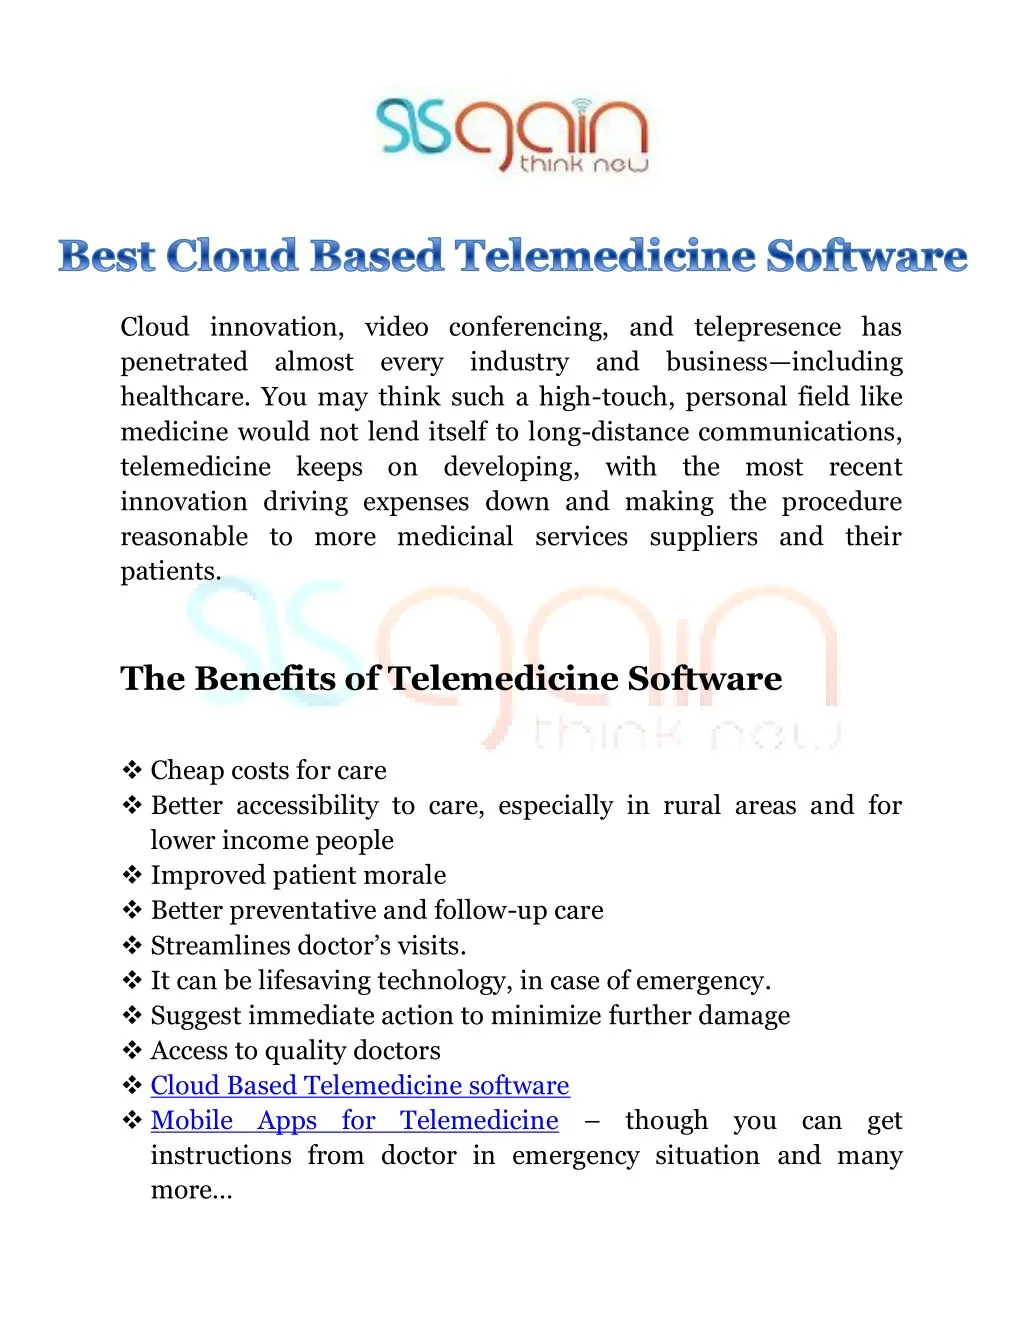 cloud innovation video conferencing